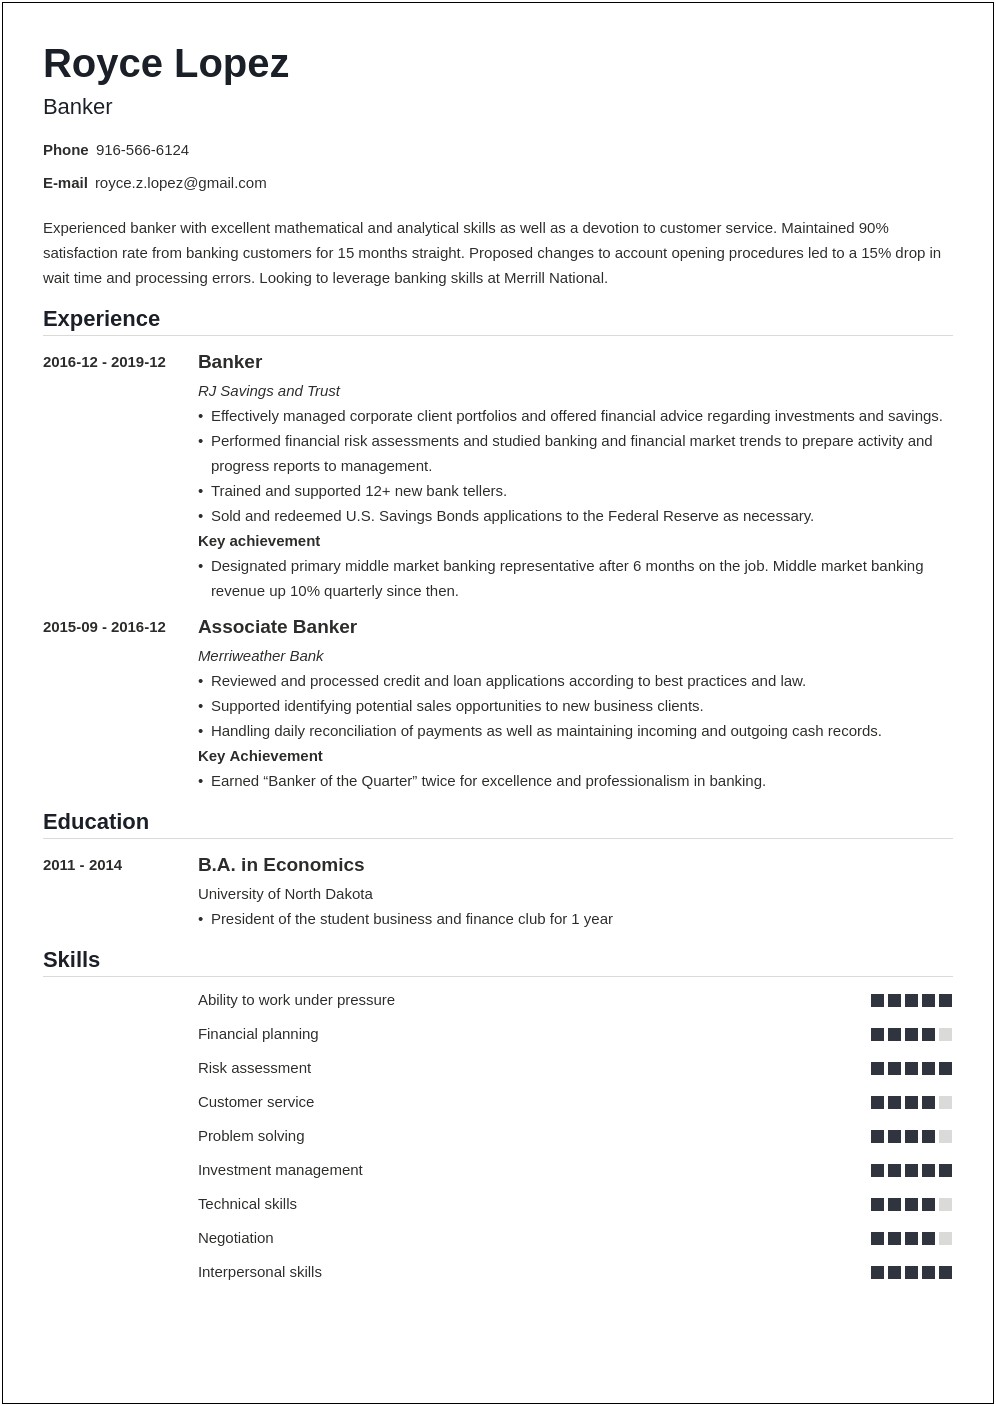 Resume Summary Examples For Bank Lending